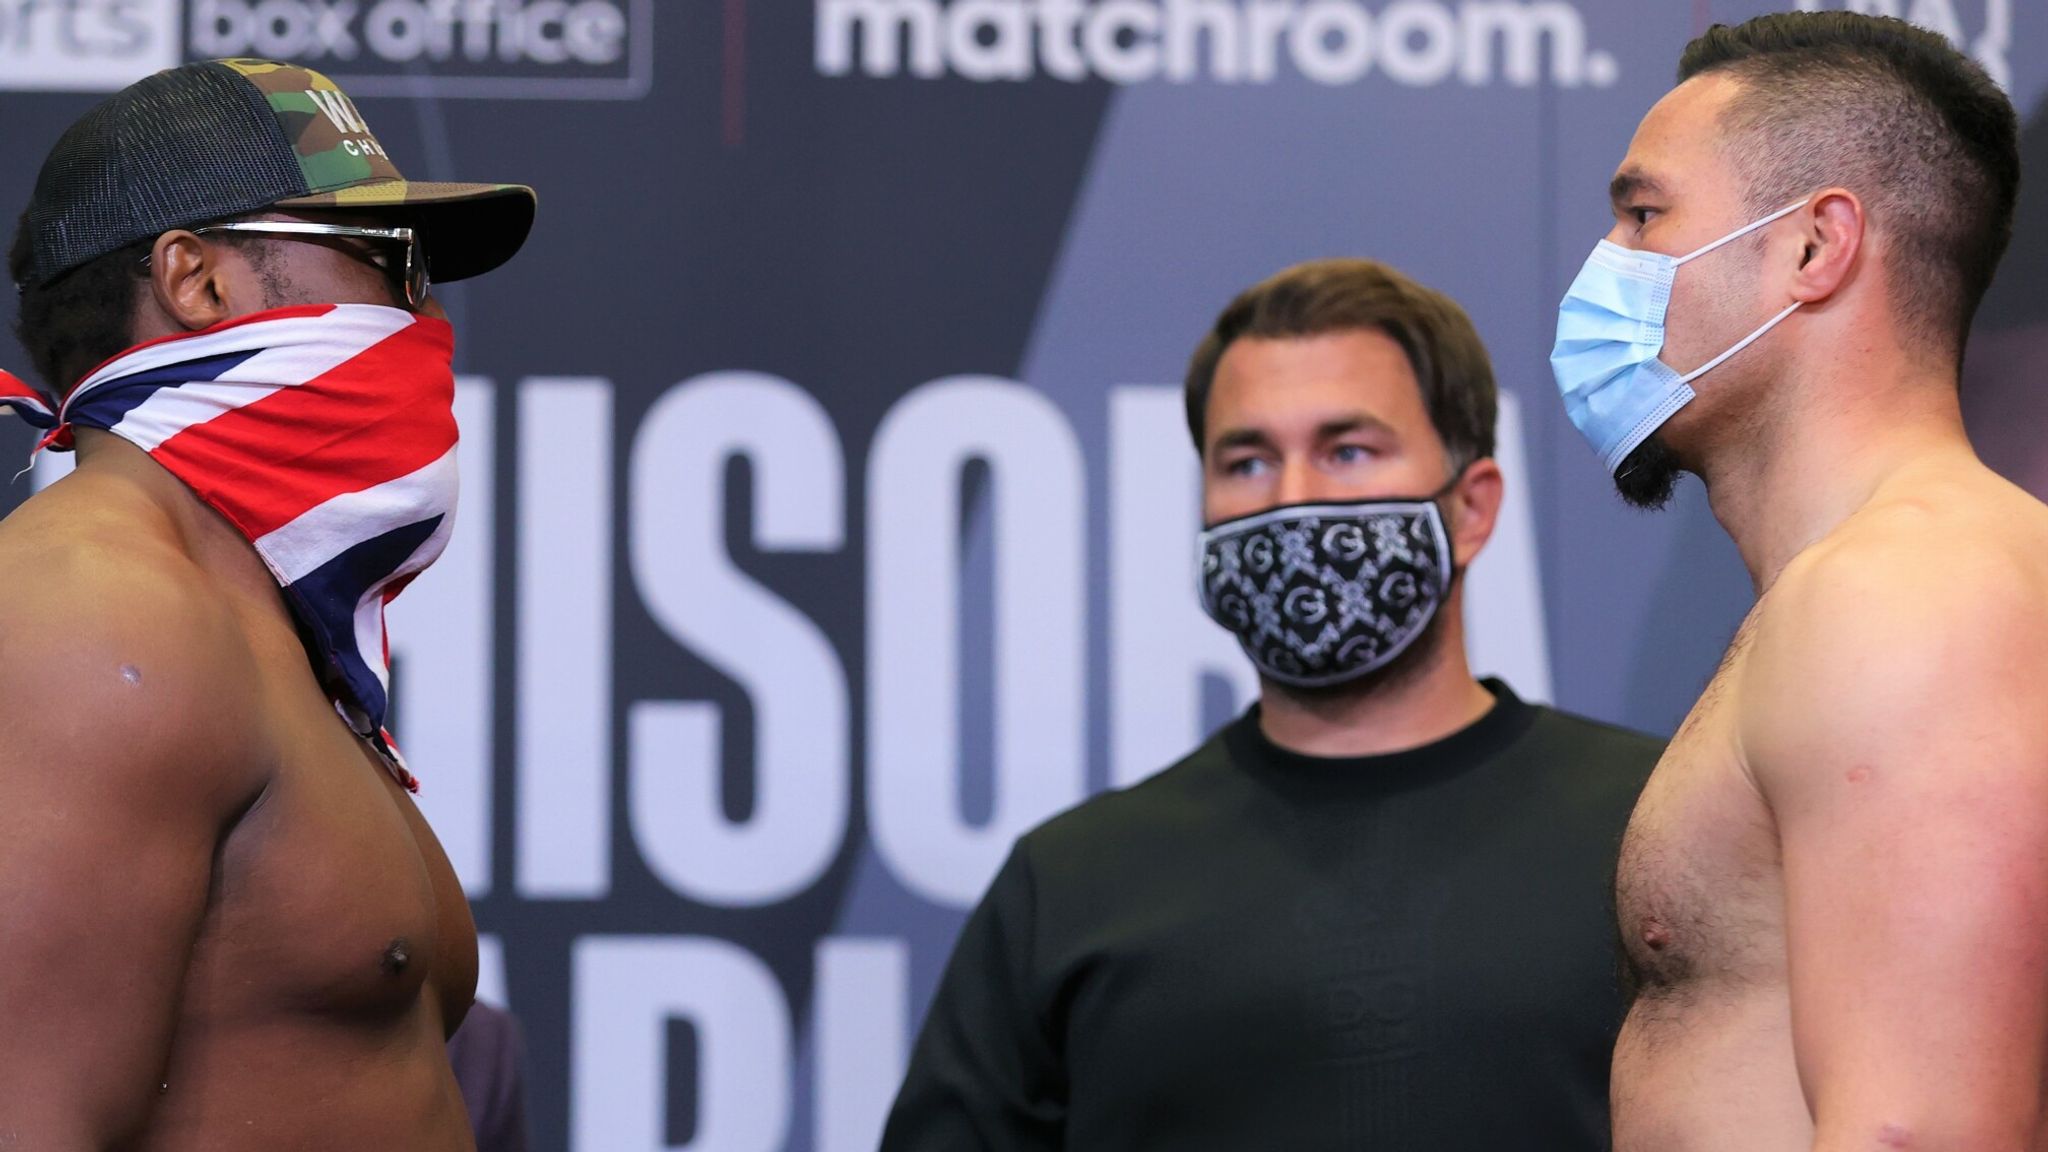 Derek Chisora ignited a heated row with Joseph Parker at the weigh-in for their heavyweight fight Boxing News Sky Sports